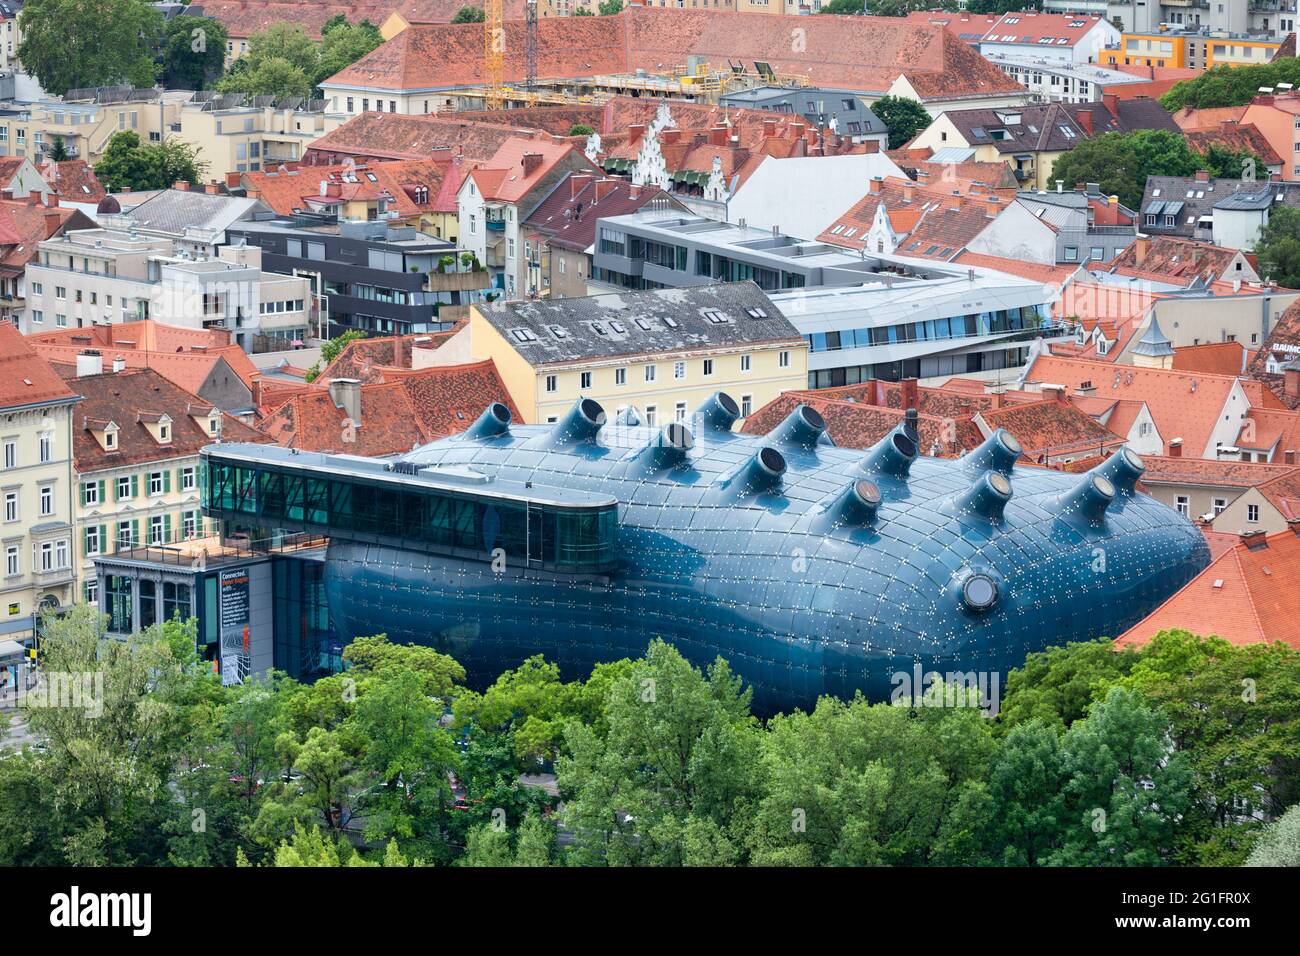 Graz, Austria - May 28 2019: Aerial view of the Kunsthaus Graz, a riverside modern art museum in amorphous blue building, with cutting-edge, temporary Stock Photo